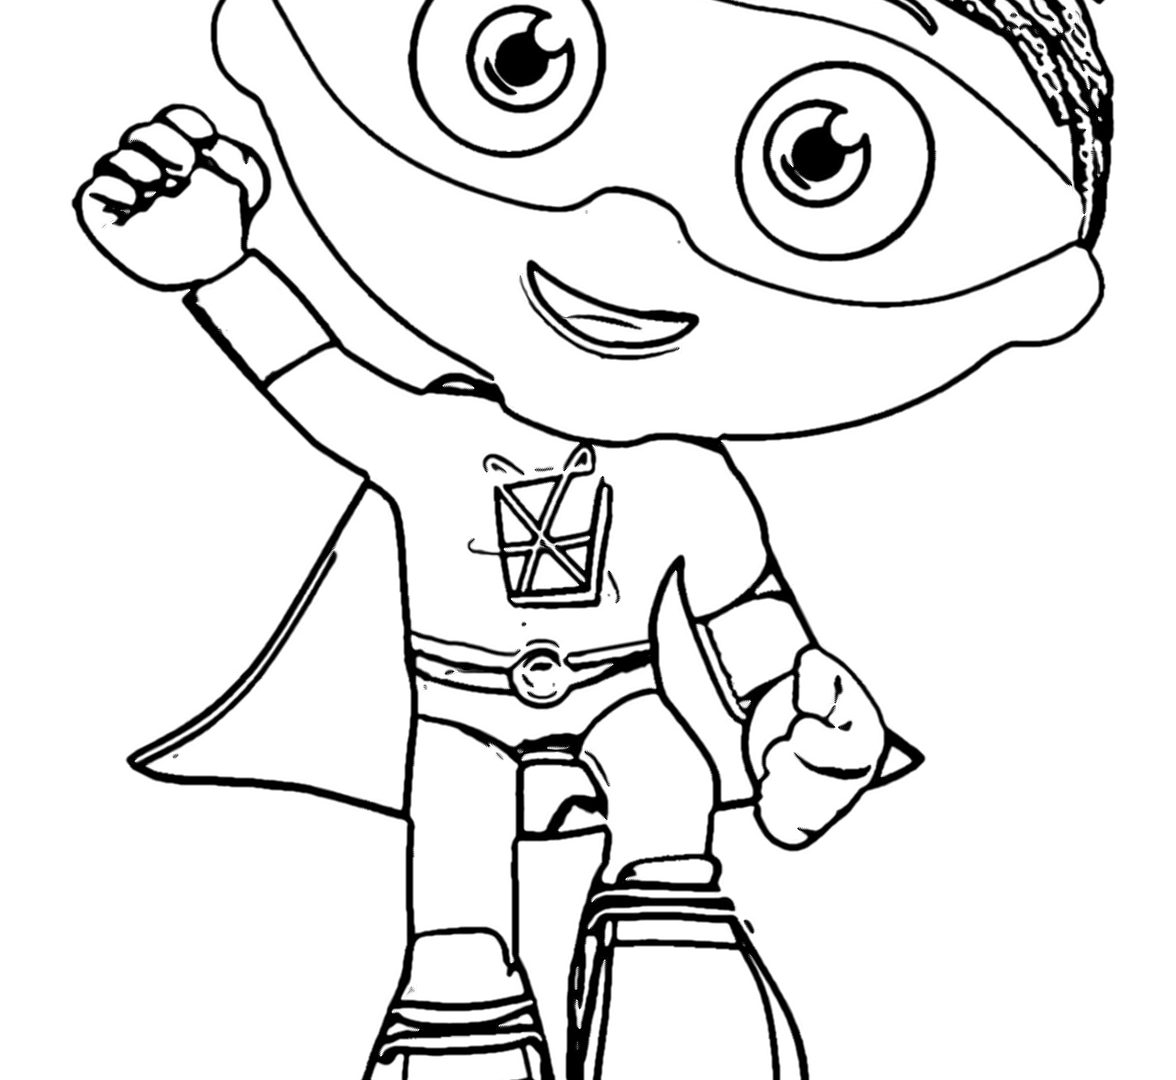 Super Why Coloring Pages Printable at Free printable